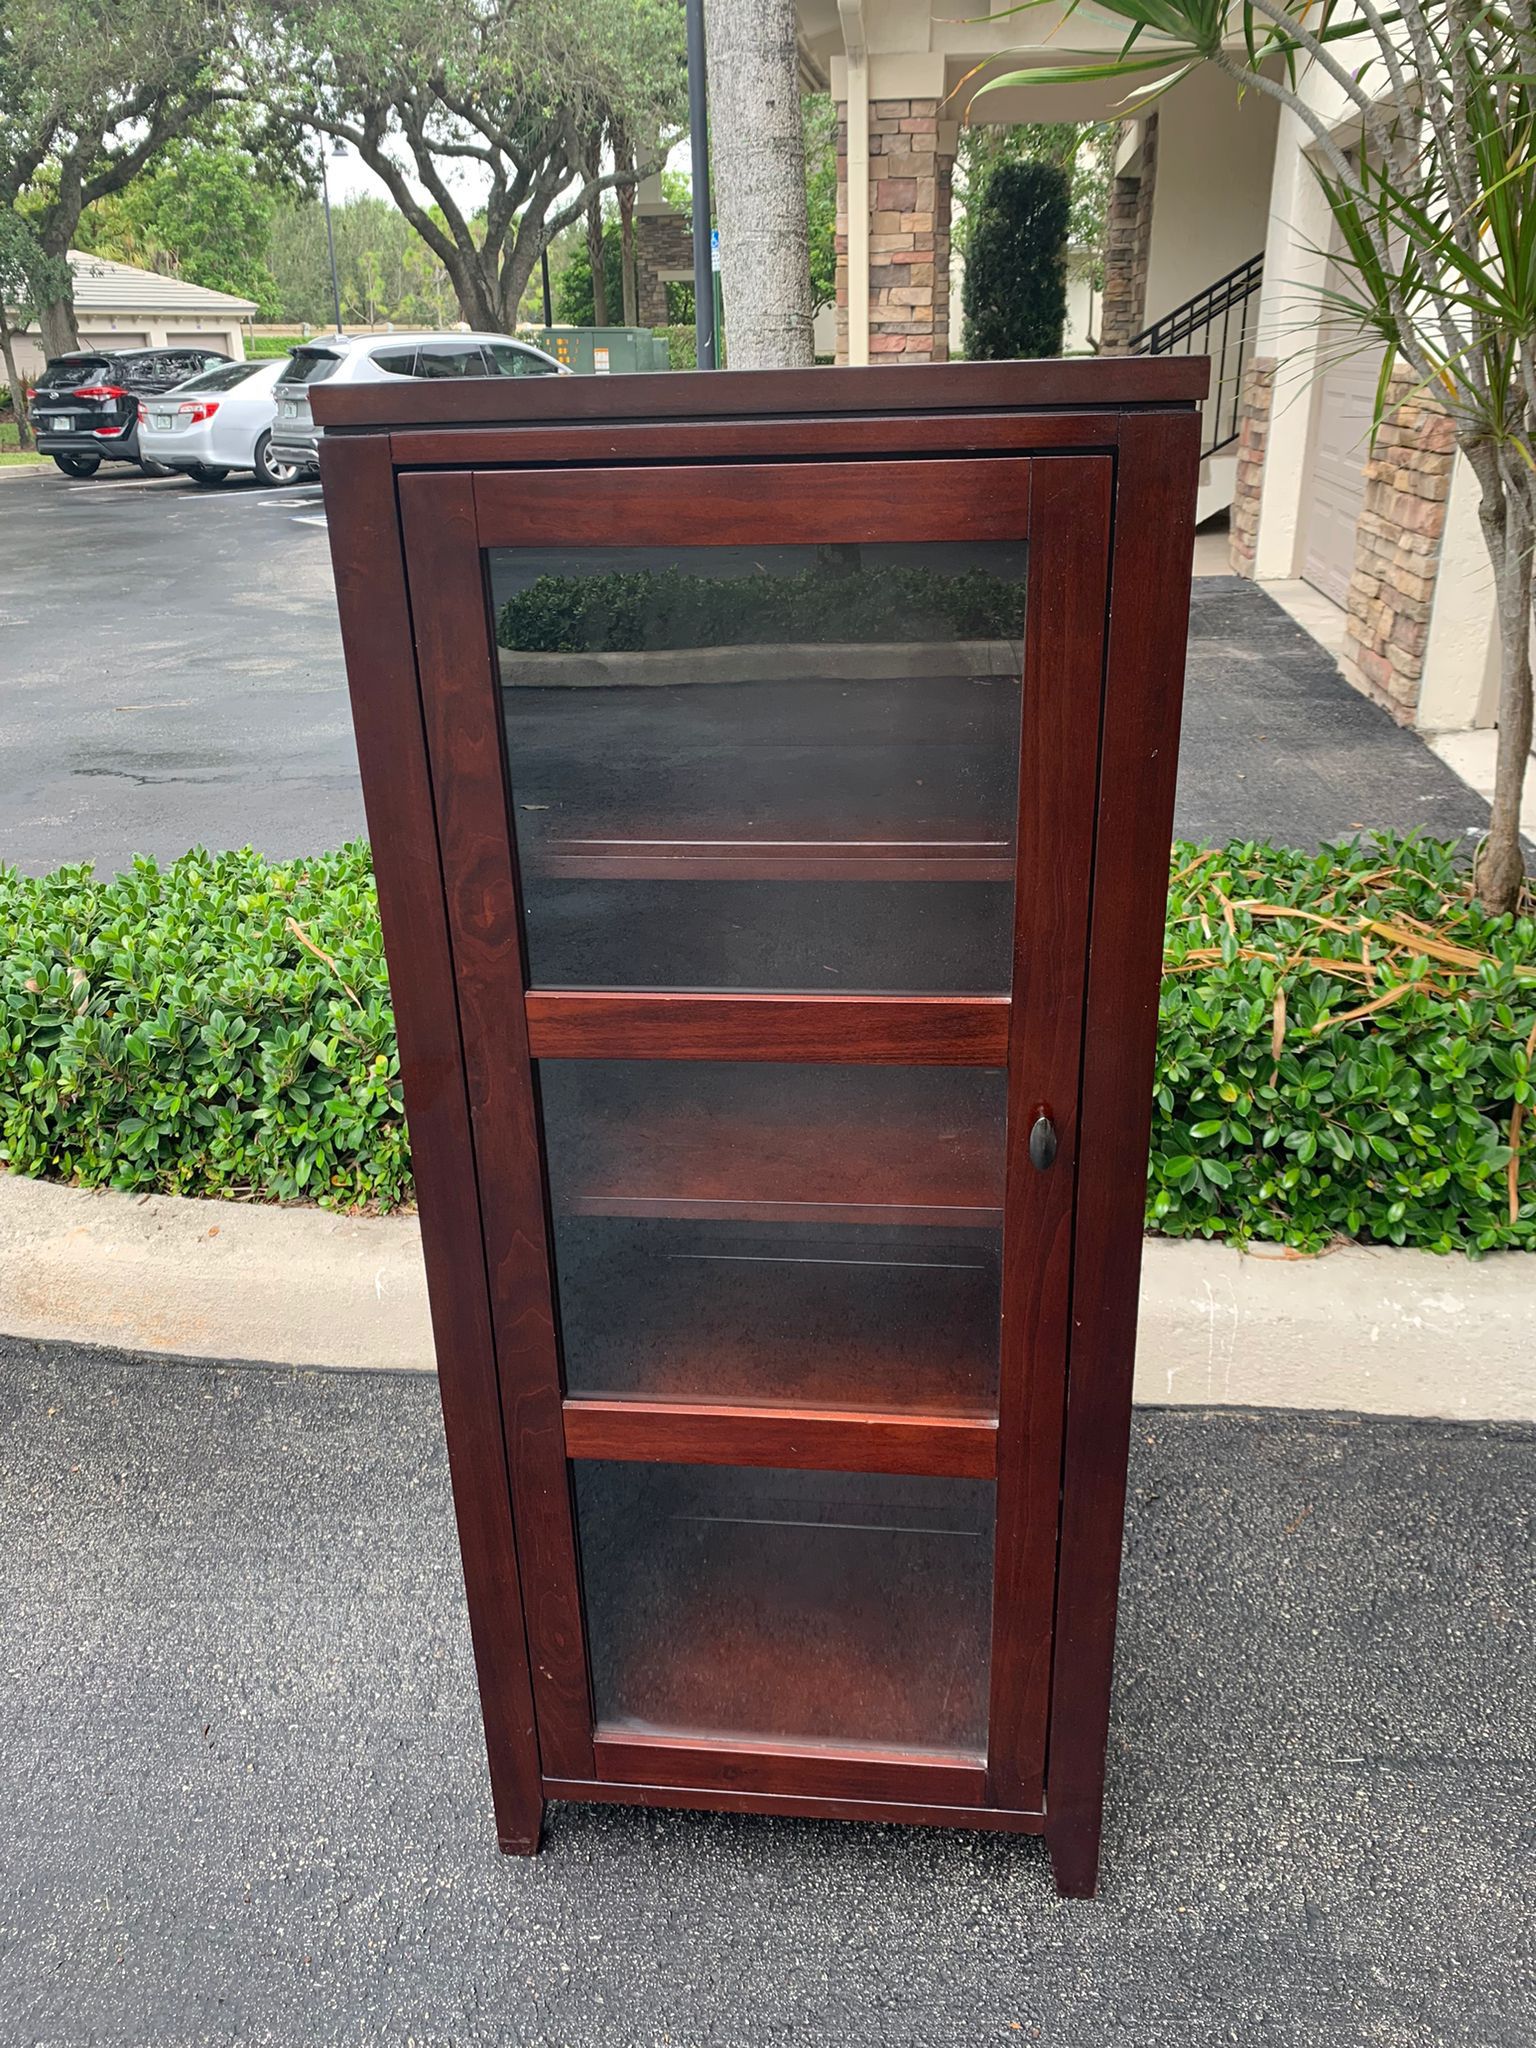 SOLID WOOD BOOKSHELF with Glass Door - Great Condition - Delivery is negotiable